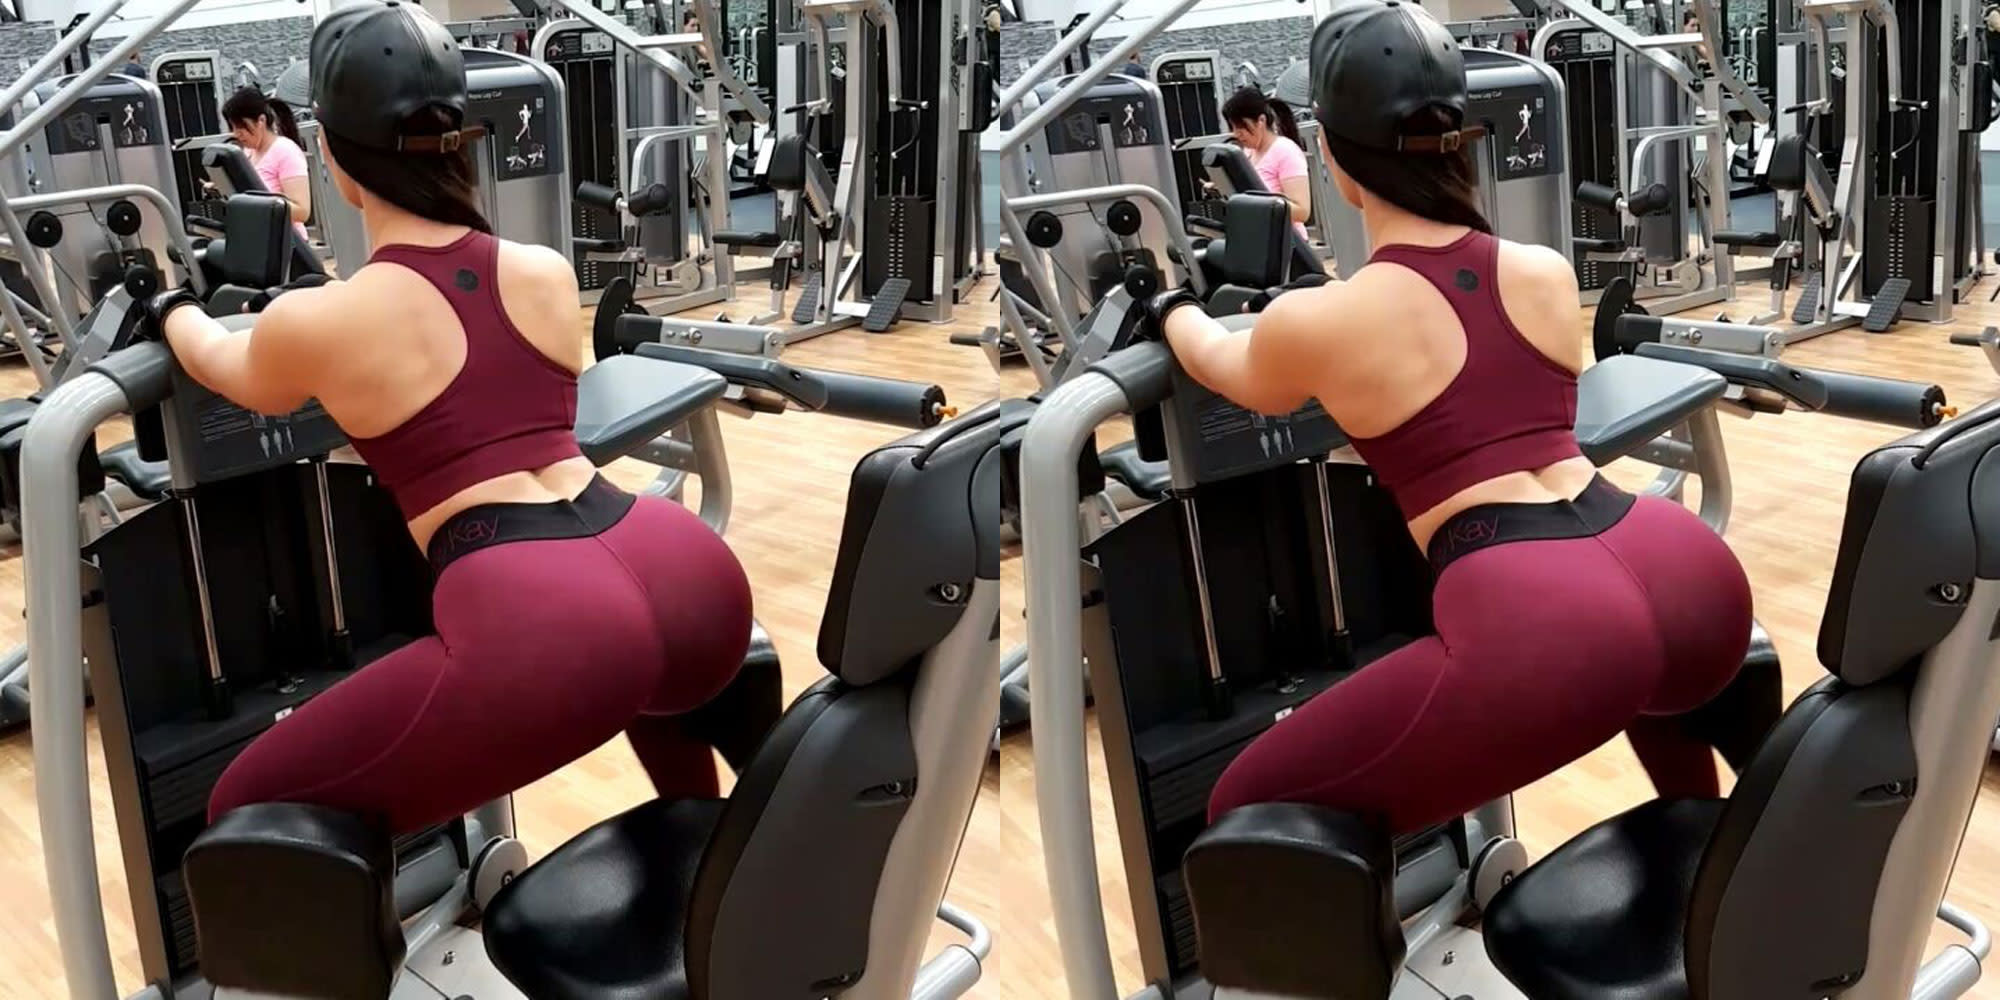 Women Are Using This Gym Hack For Extra Buff Butts 0960